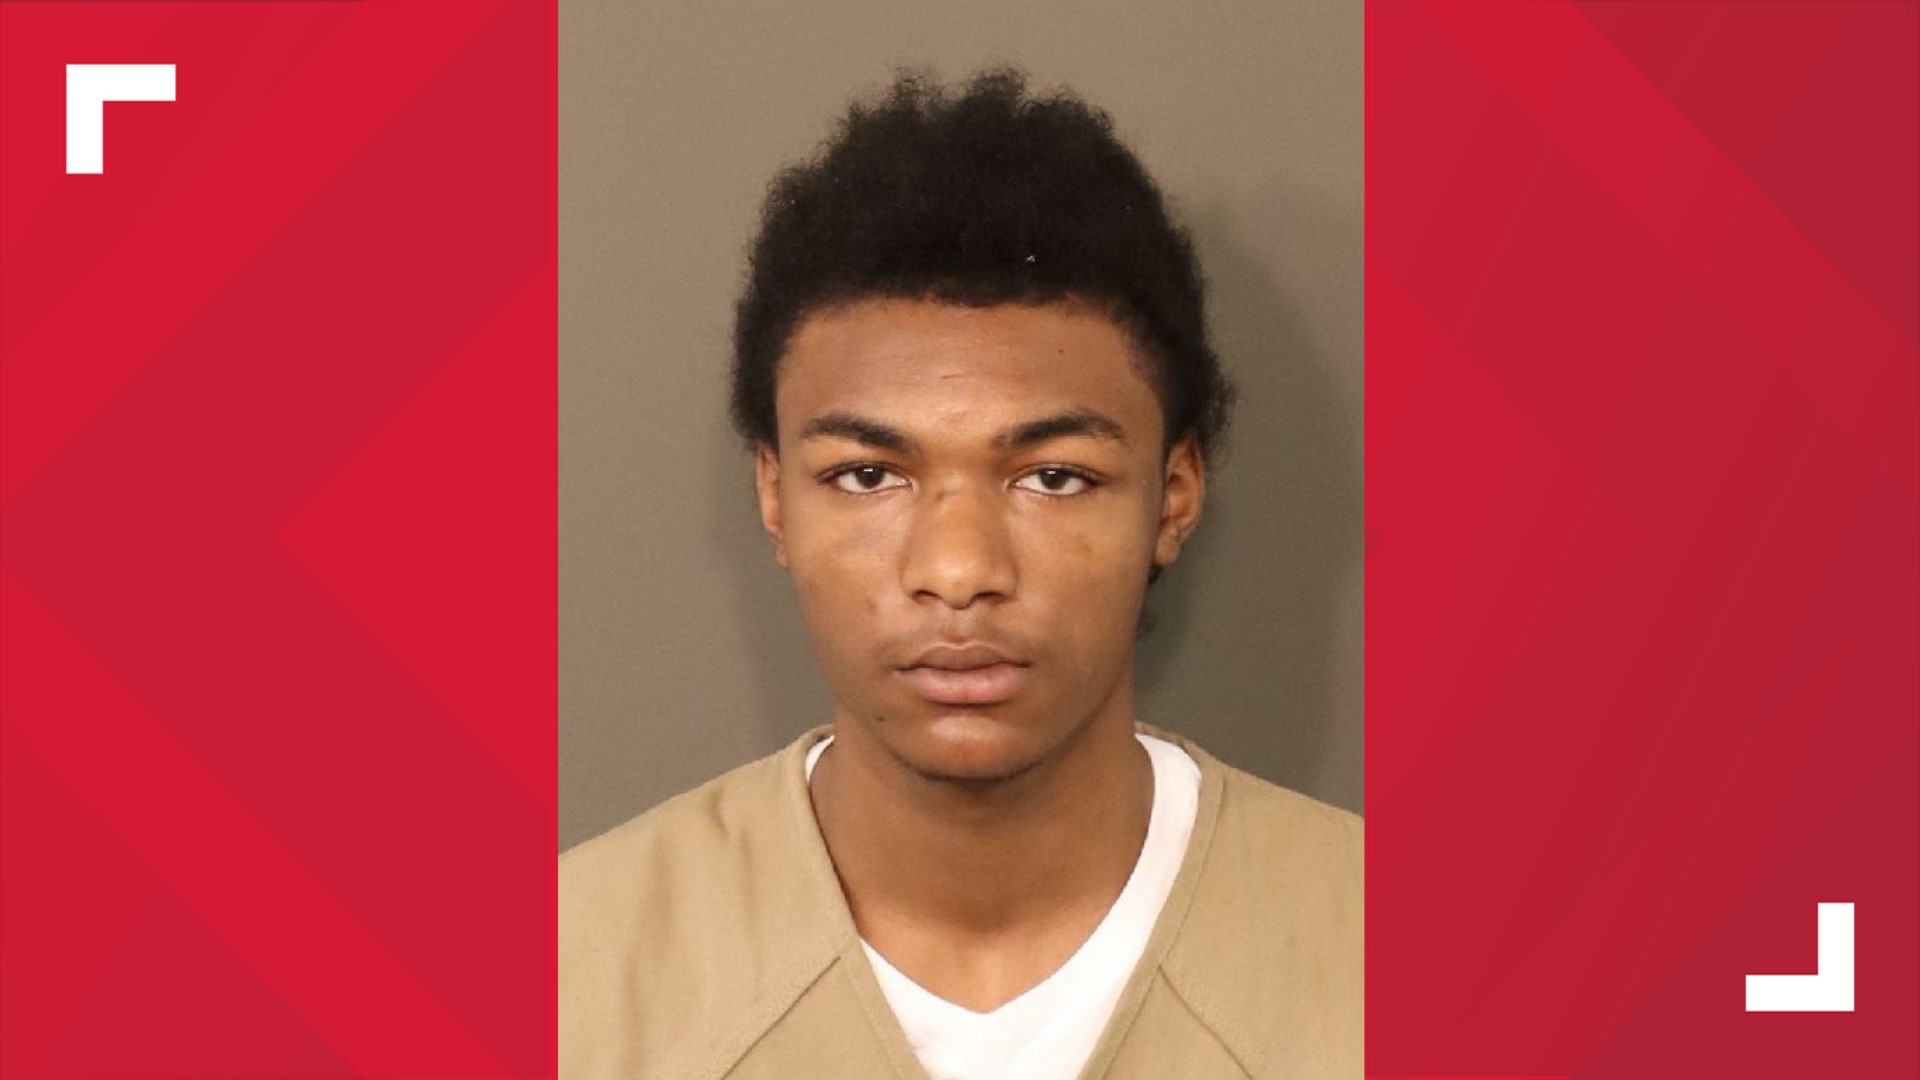 Keimariyon Ross is charged with murder for allegedly shooting and killing 21-year-old Kevin Sobnosky at the Sheetz gas station located at 1485 North Cassady Avenue.